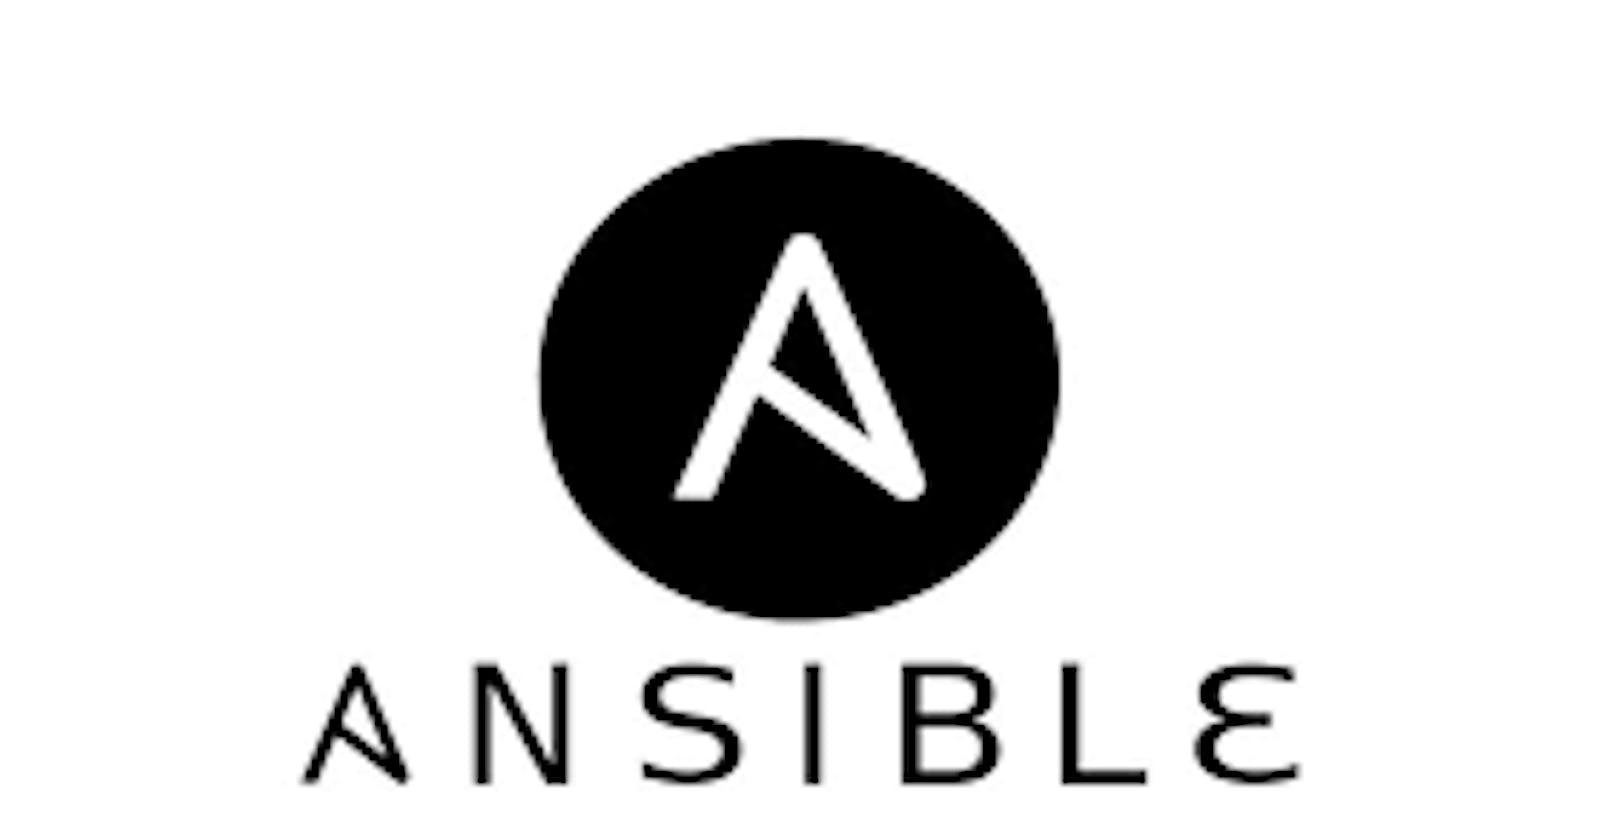 Overview of  ANSIBLE